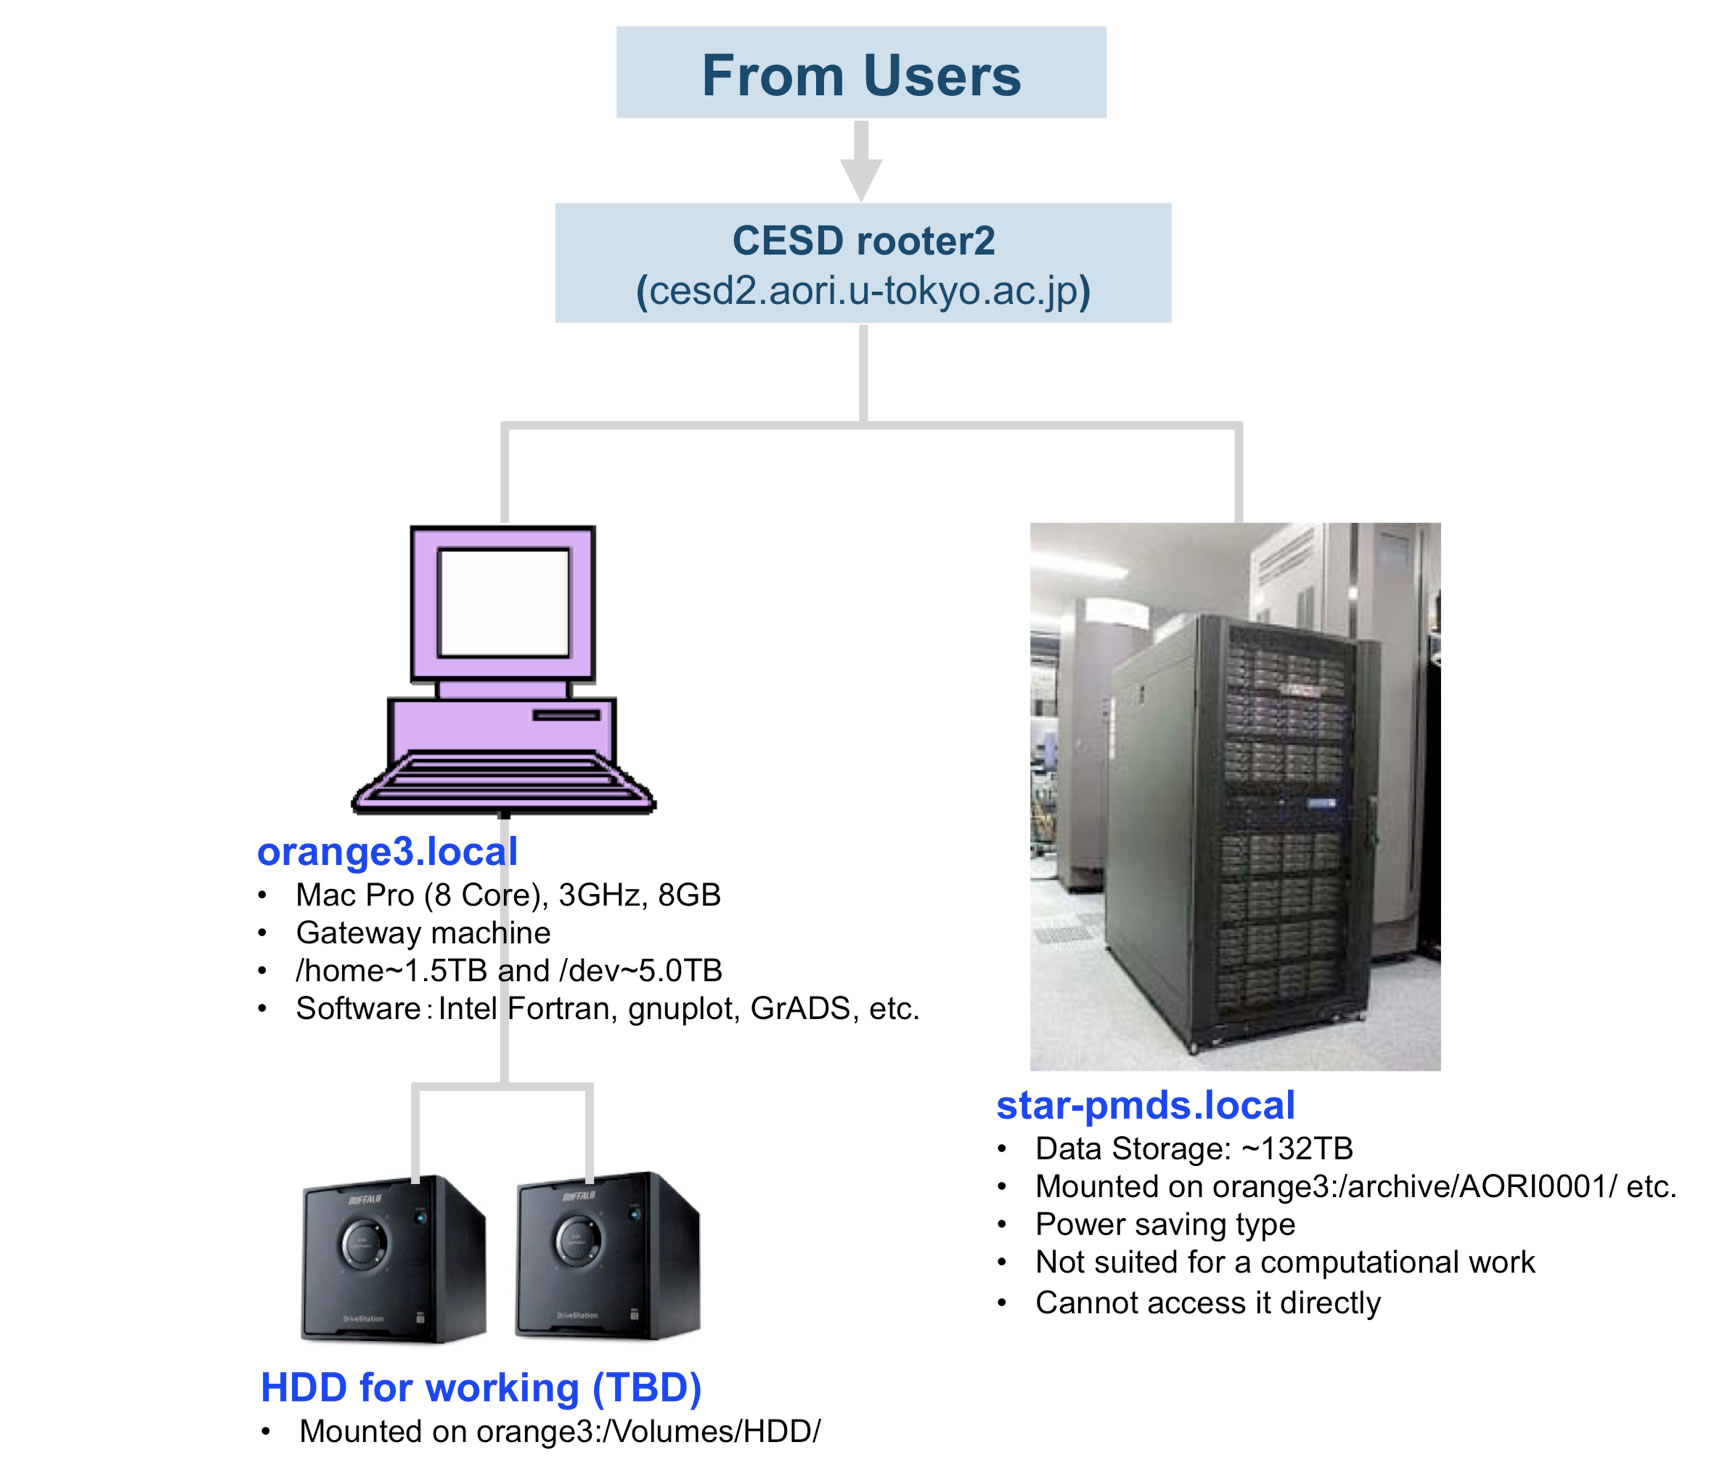 Fig 1: Overview of the network